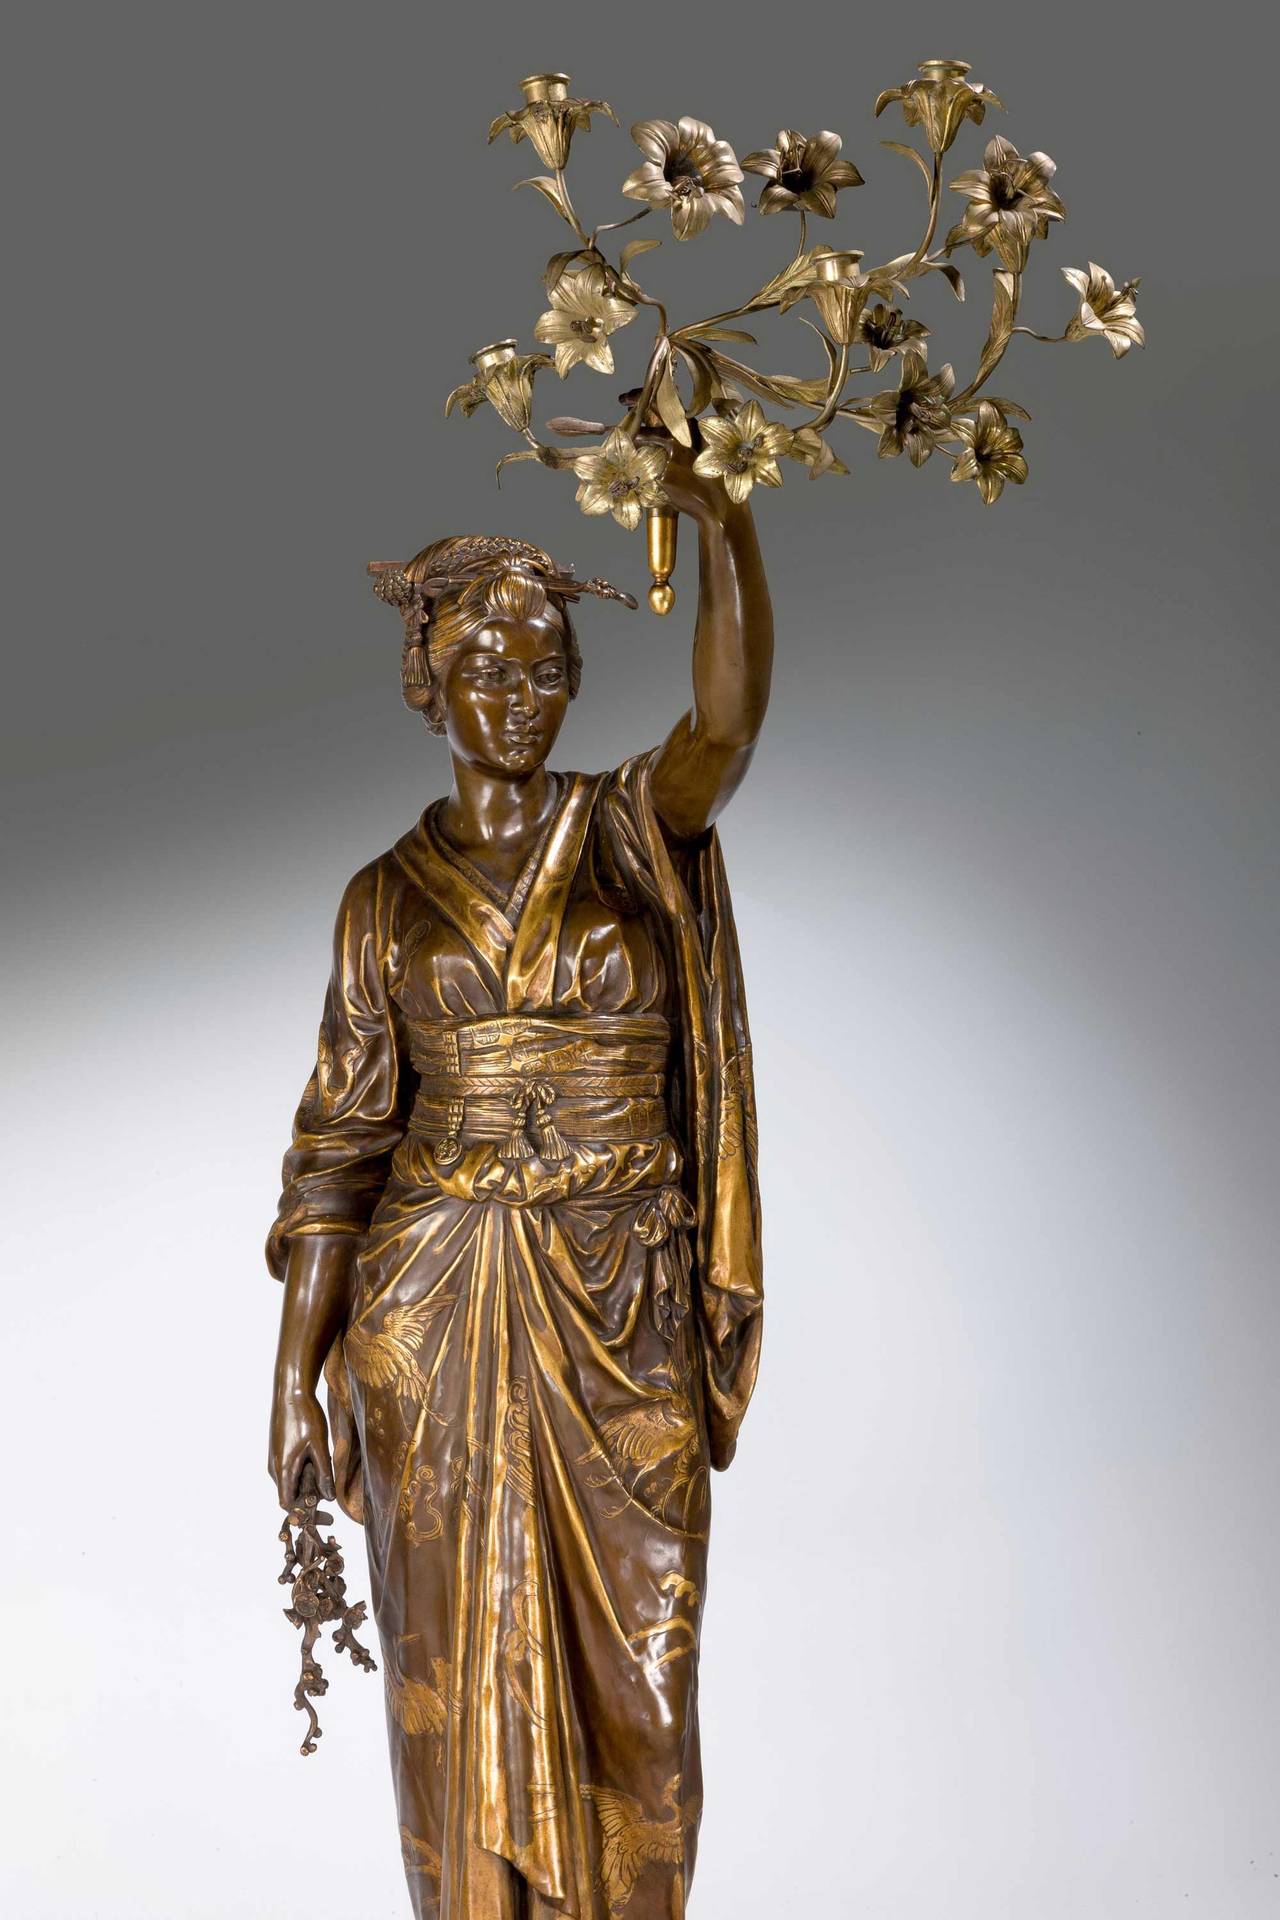 A fine pair of bronze and gilt bronze sculptures both signed F Barbedienne and Ele Guillemin.
Each in the form of a standing Japanese female figure in a kimono, one embroidered with prunus, the other with cranes, one with a fan in her hand, the